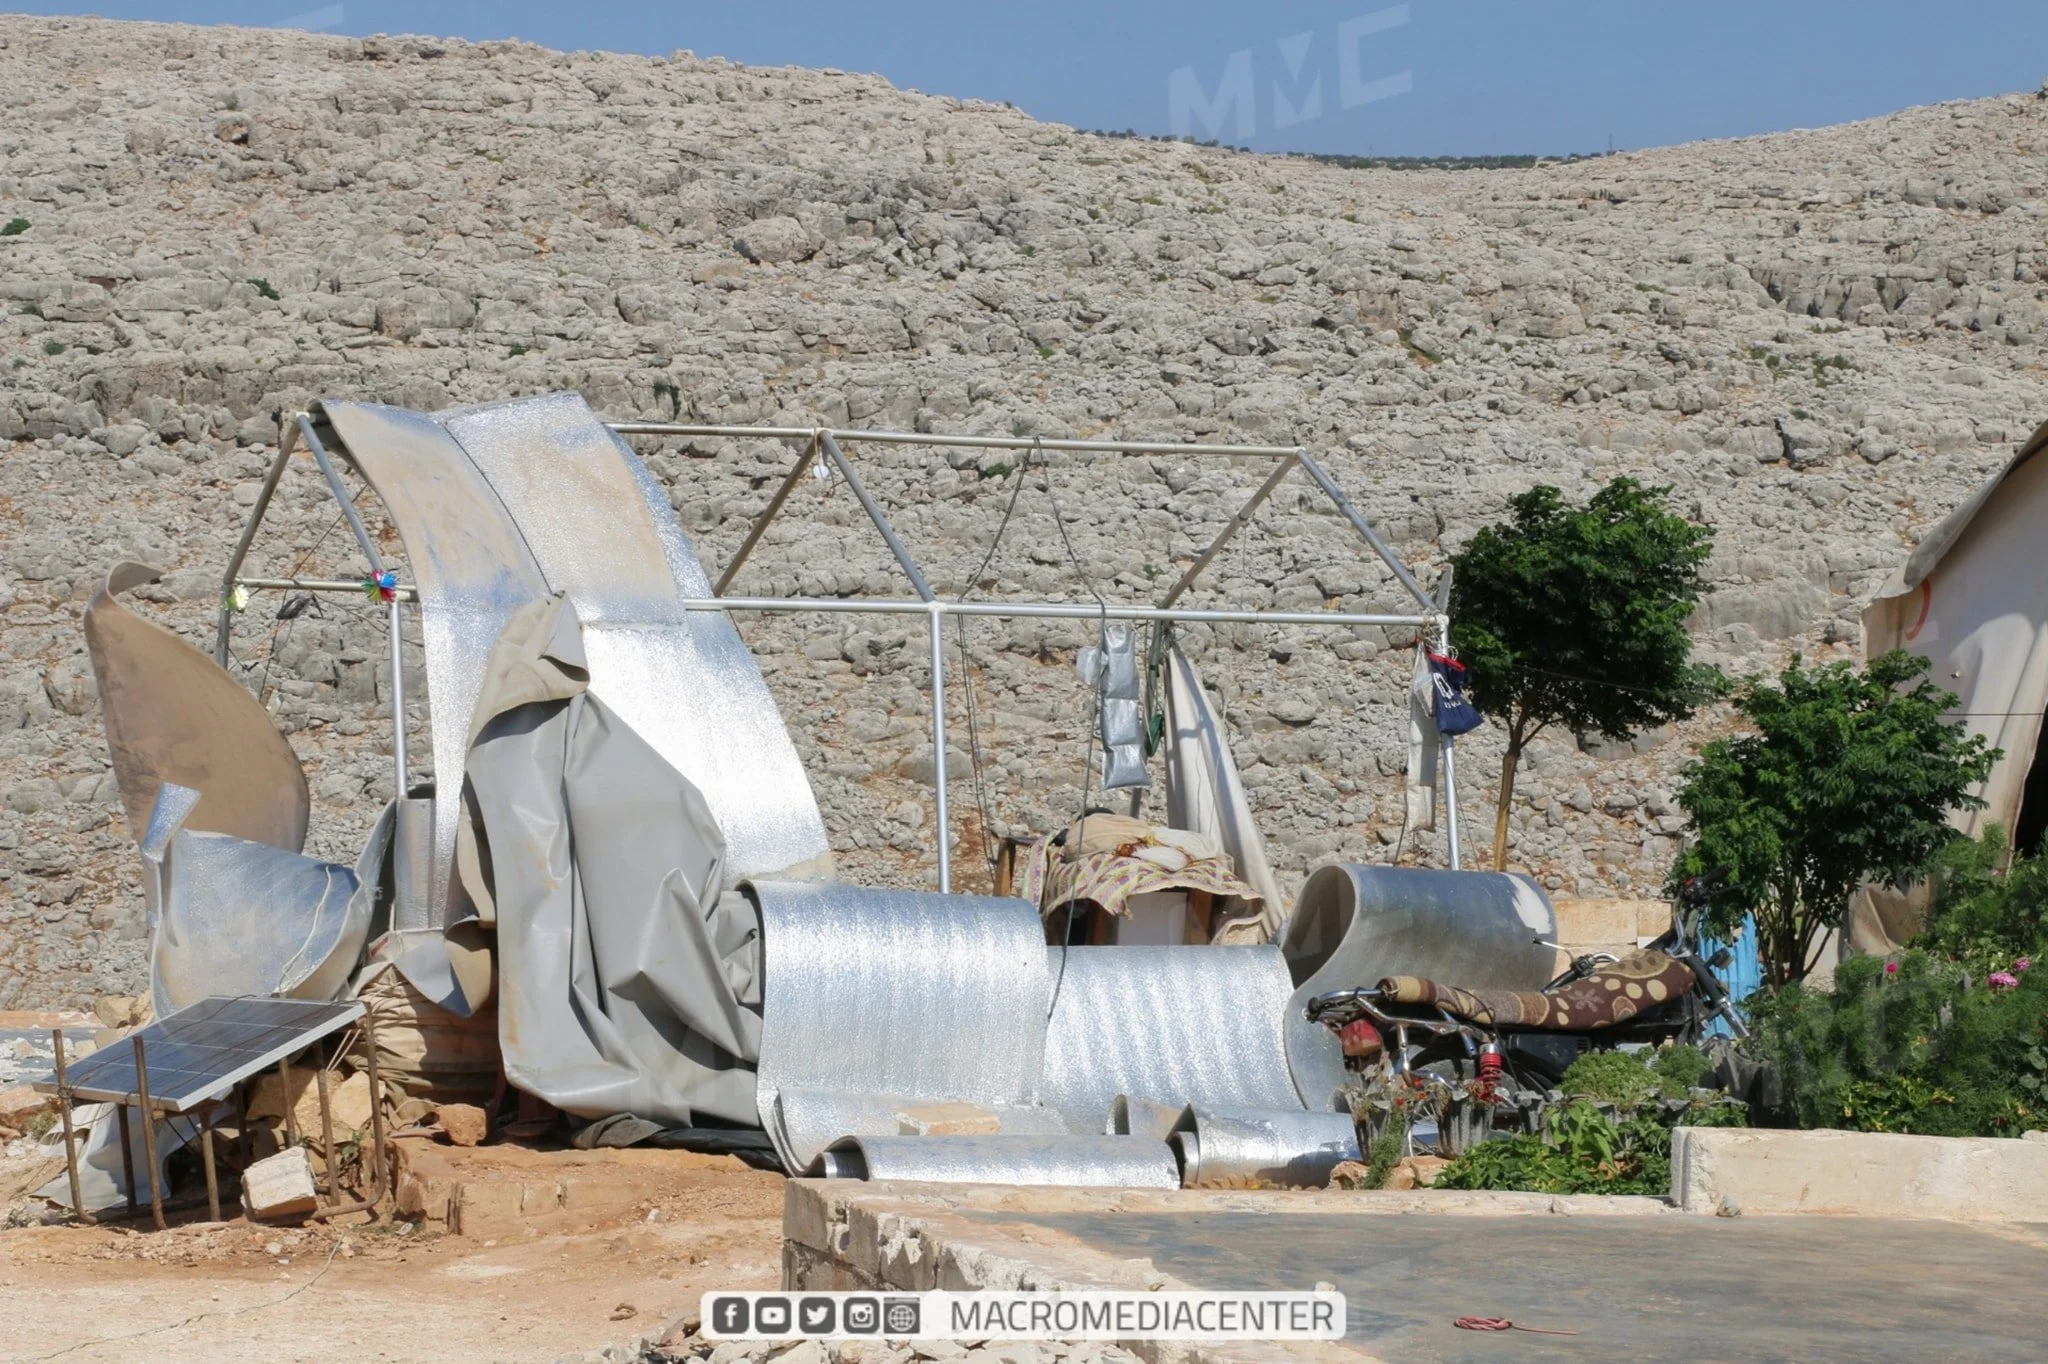 A windstorm hit several IDPs camps in Idlib governorate on August 7, 2022